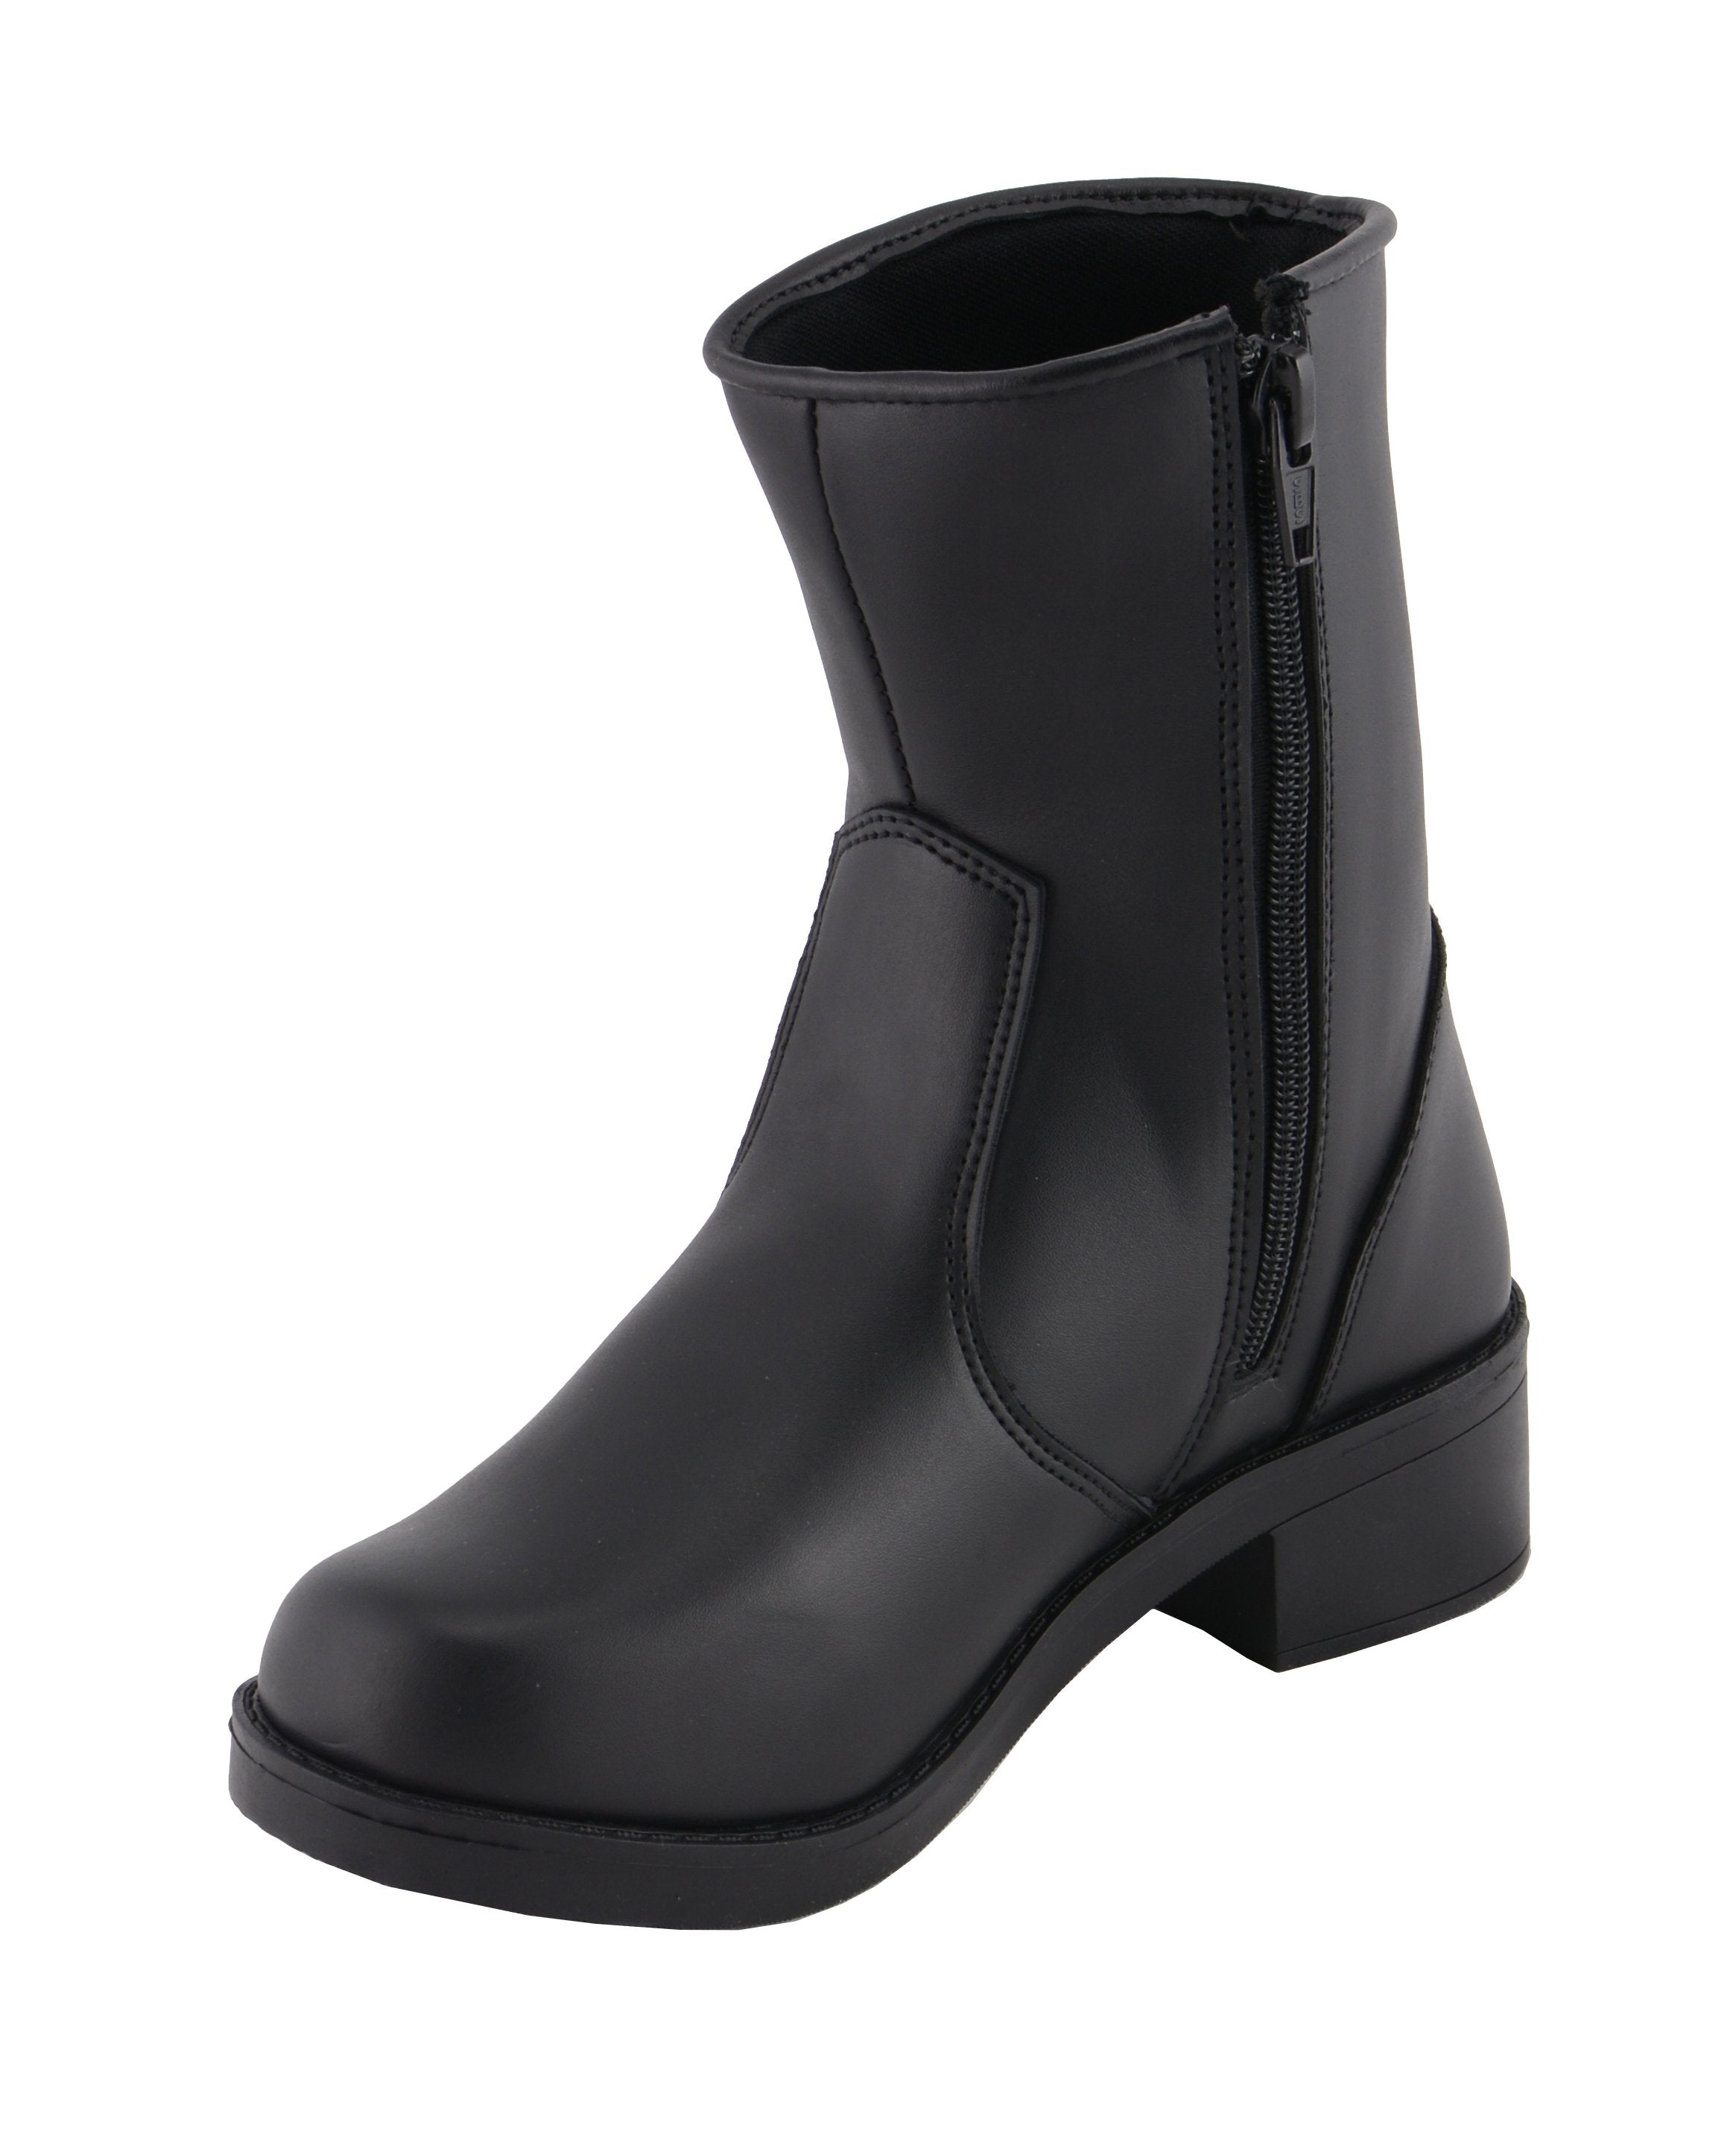 Milwaukee Leather MBL9480 Ladies Black Super Clean Riding Boot with Side Zipper Entry - Milwaukee Leather Womens Boots